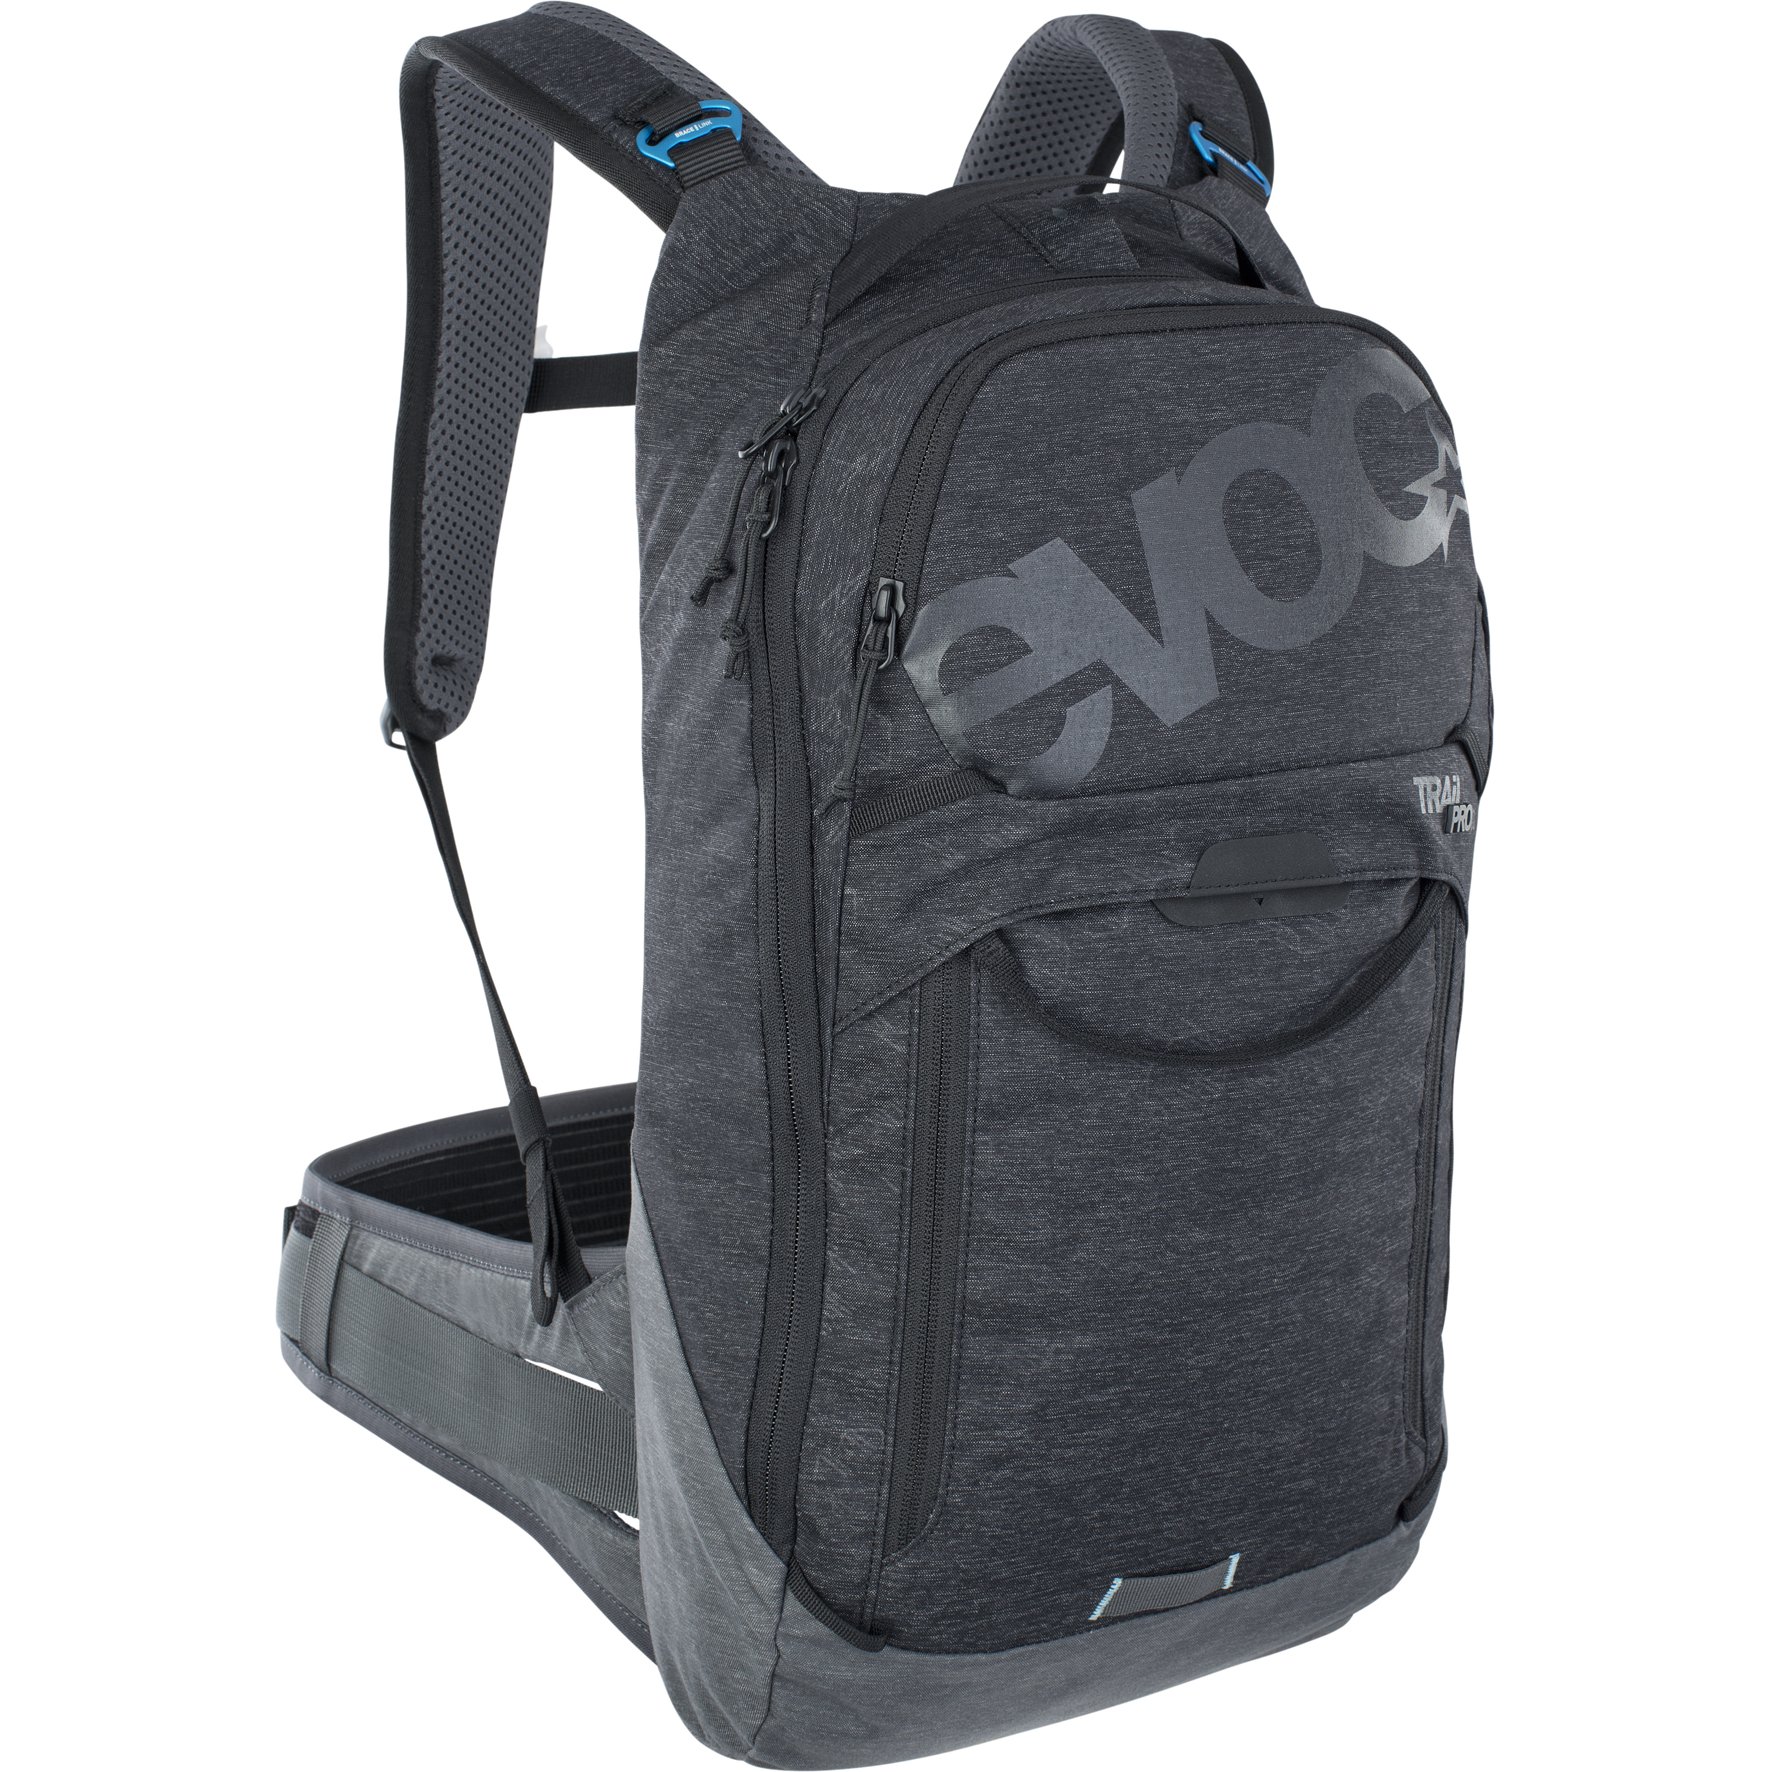 Picture of EVOC Trail Pro 10L Protector Backpack - Black/Carbon Grey